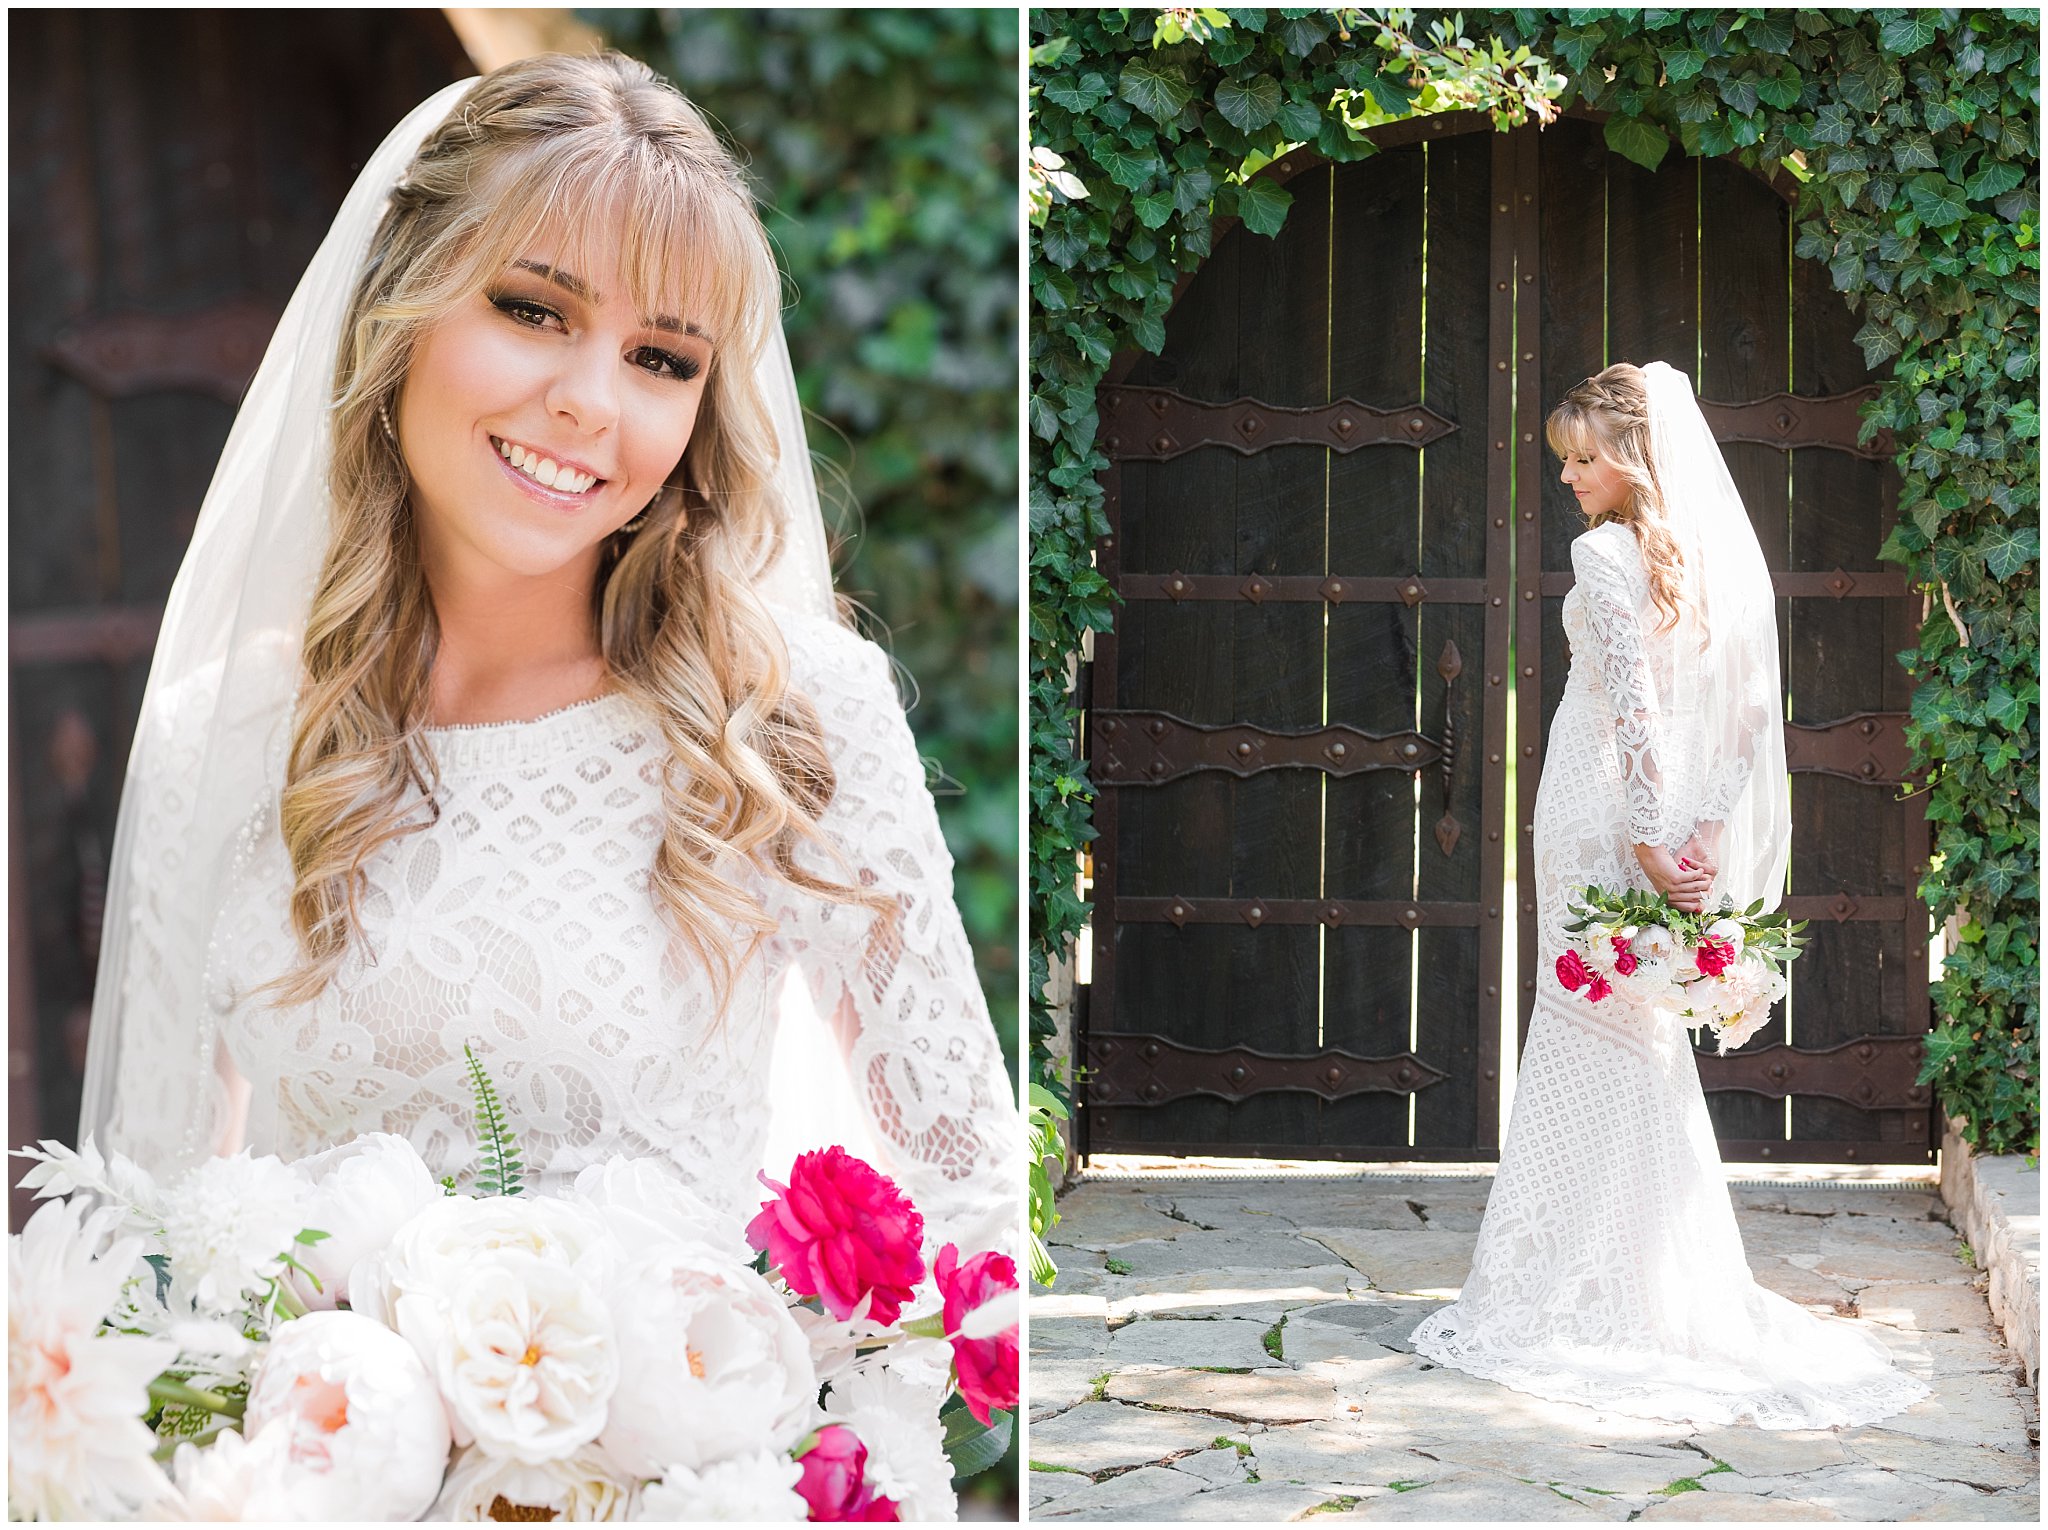 Bride in lace dress holding bouquet of white and deep pink florals | Wadley Farms Summer Wedding | Jessie and Dallin Photography